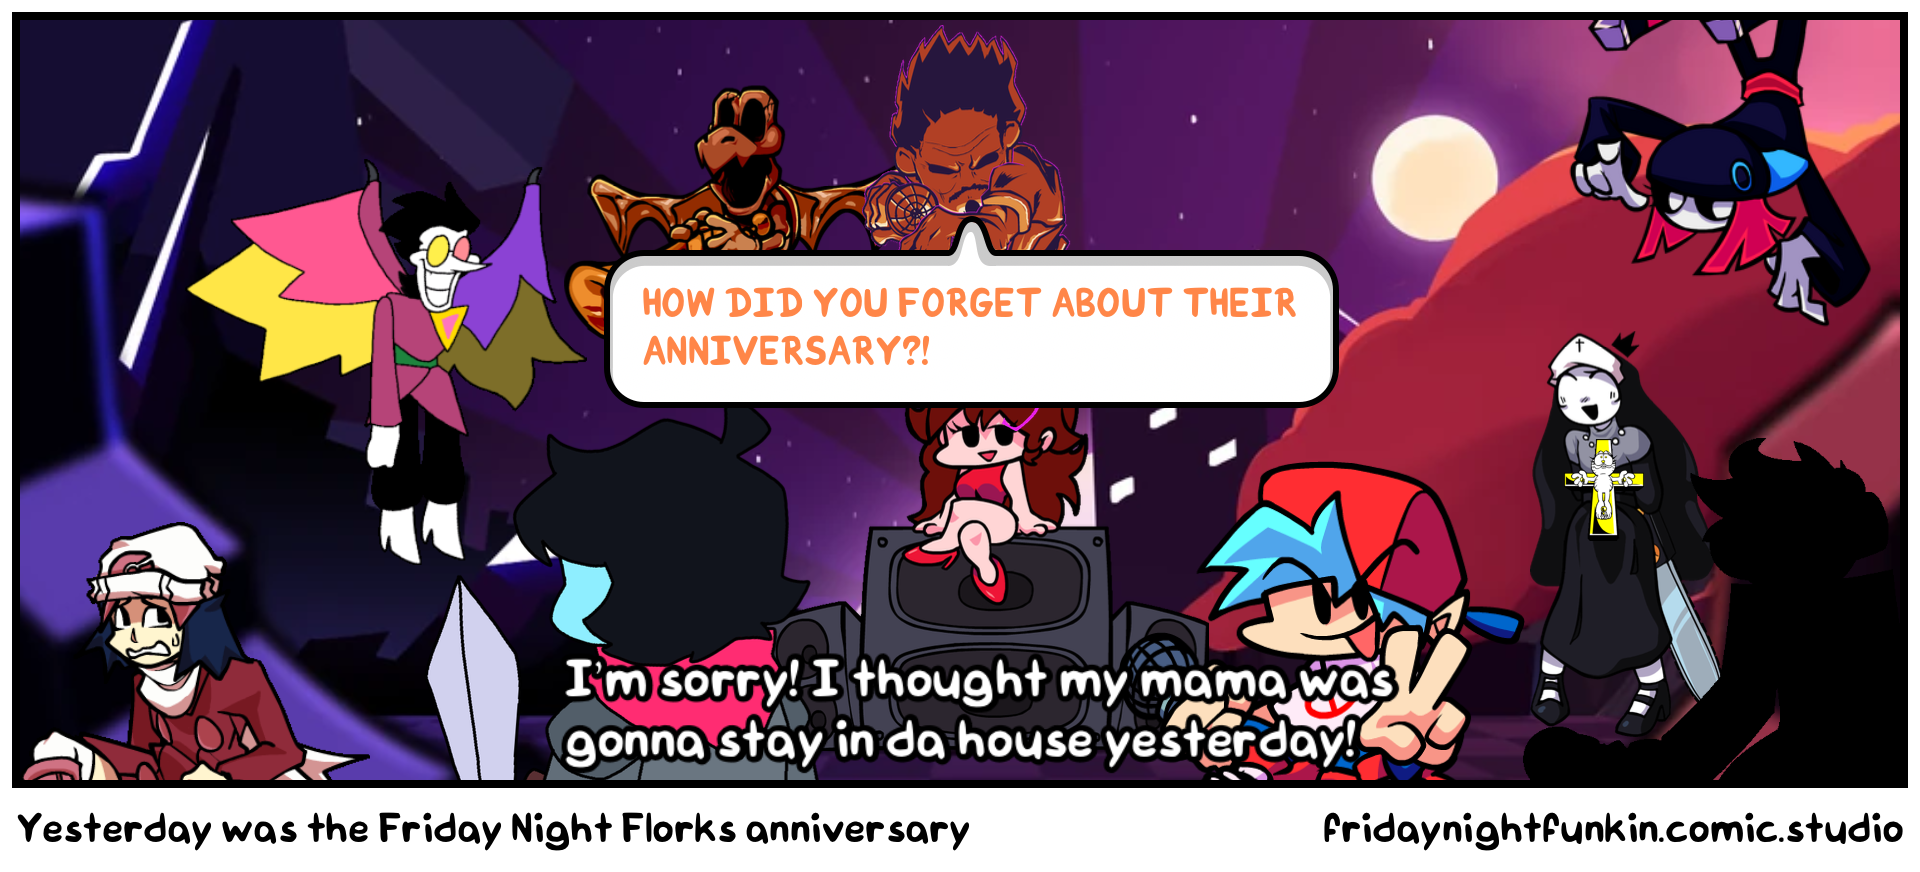 Yesterday was the Friday Night Florks anniversary